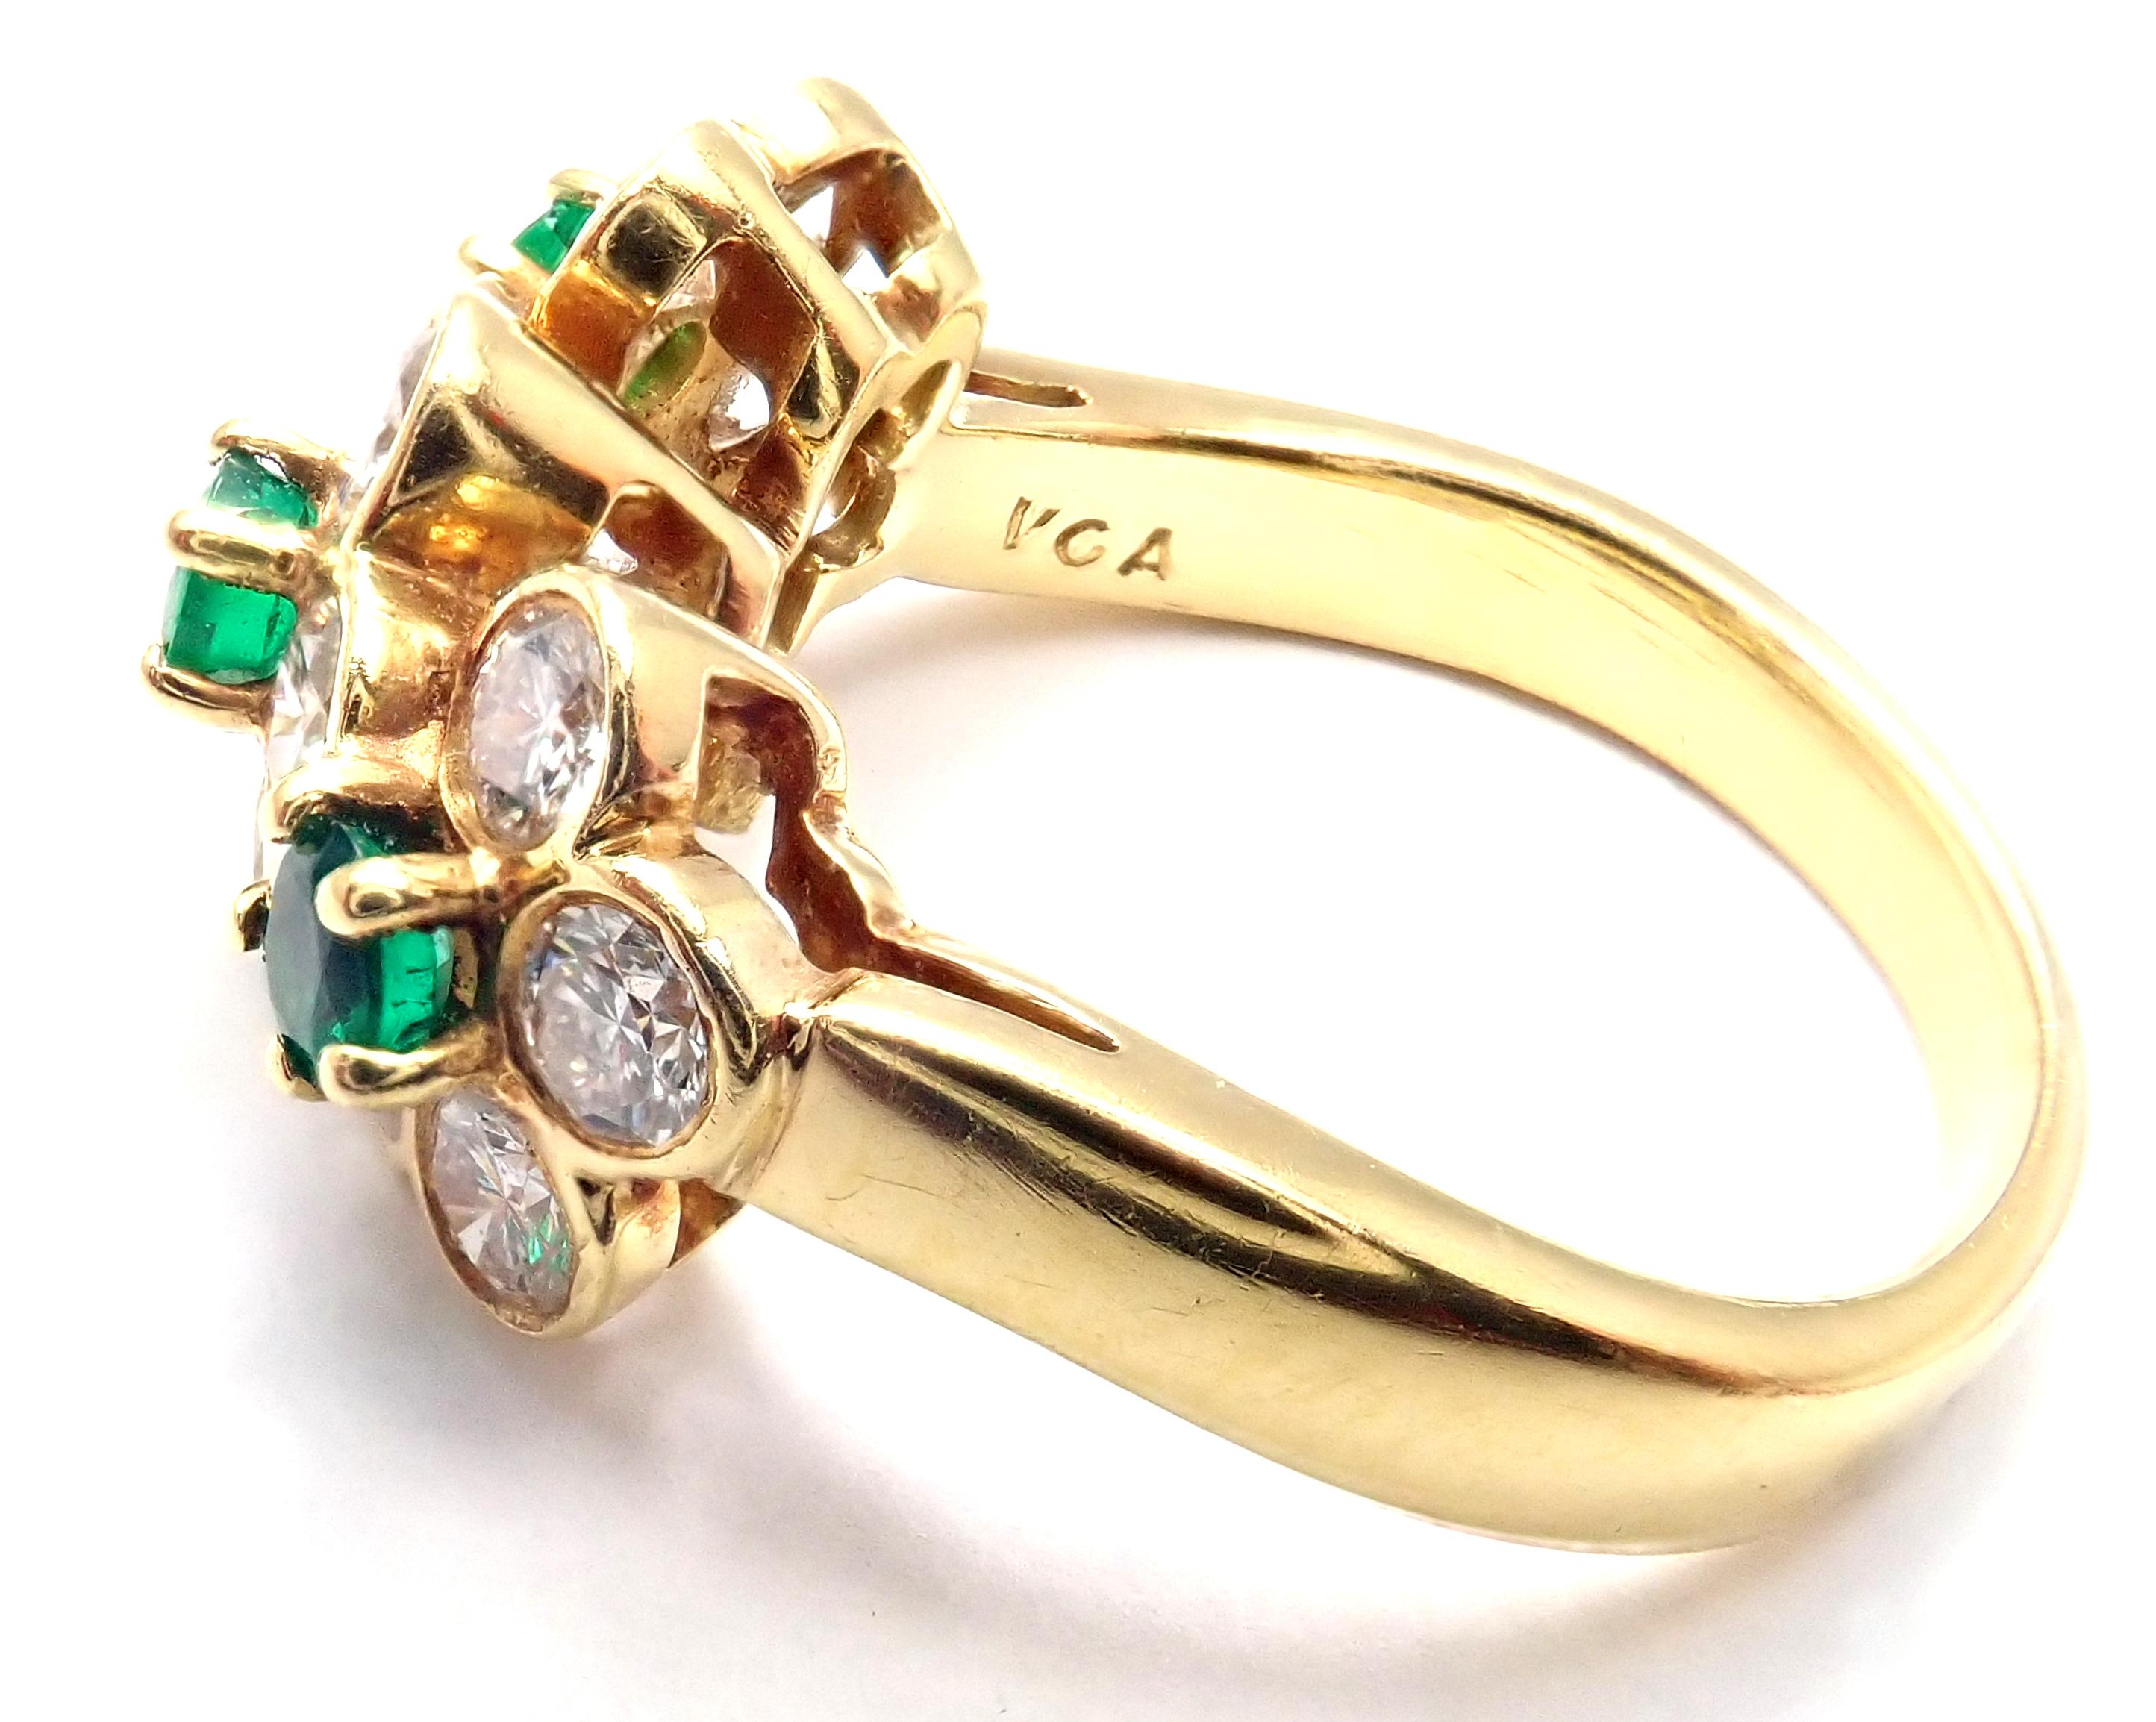 Van Cleef & Arpels Emerald Diamond Fleurette Flower Yellow Gold Band Ring In Excellent Condition For Sale In Holland, PA